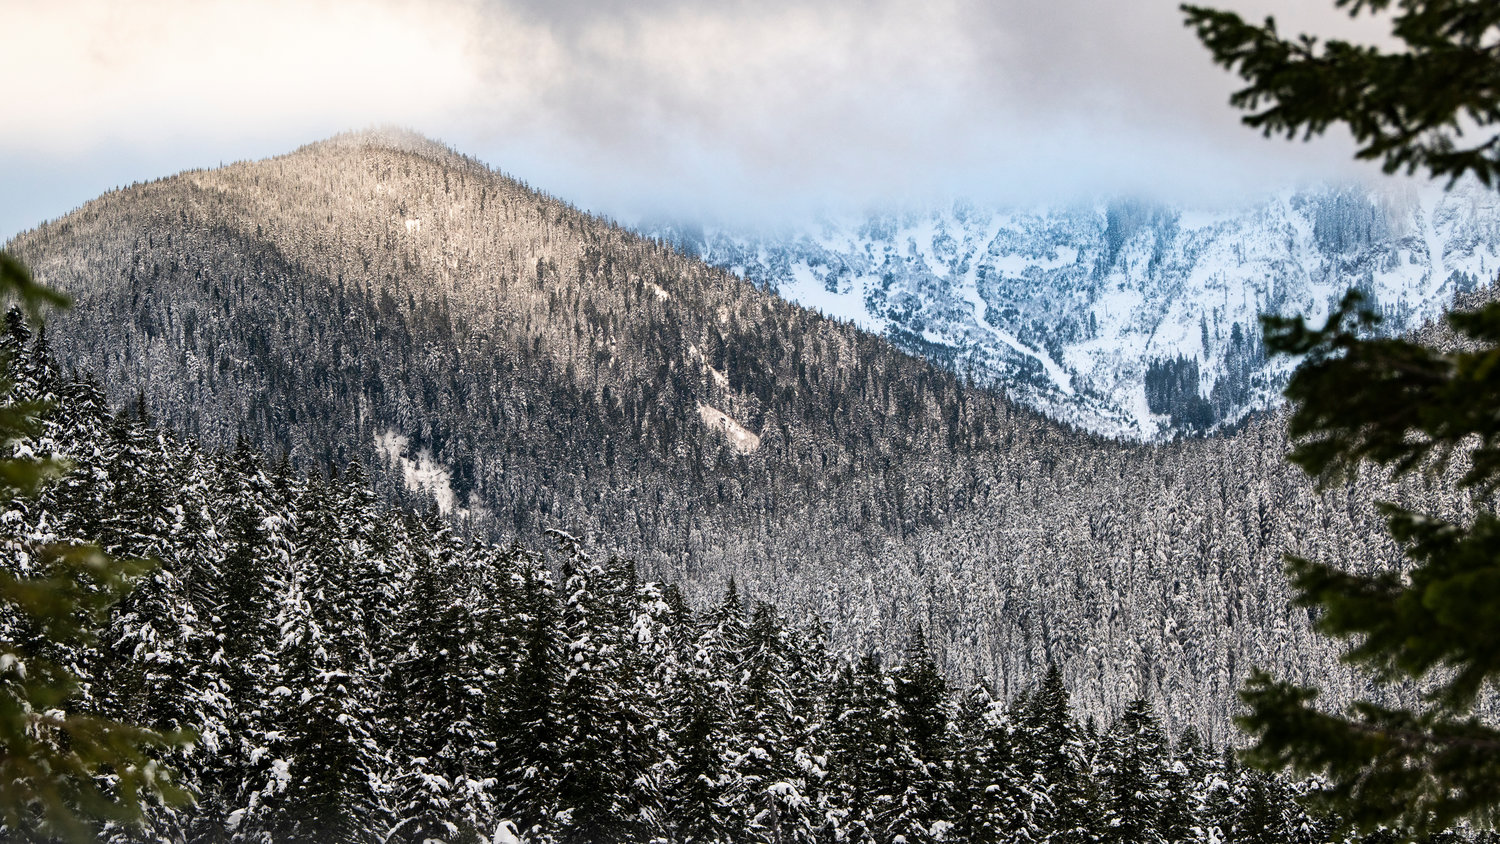 Snow covers trees as sunshine breaks through the clouds above rolling foothills of the Cascade Mountains above U.S. Highway 12 near White Pass on Tuesday.